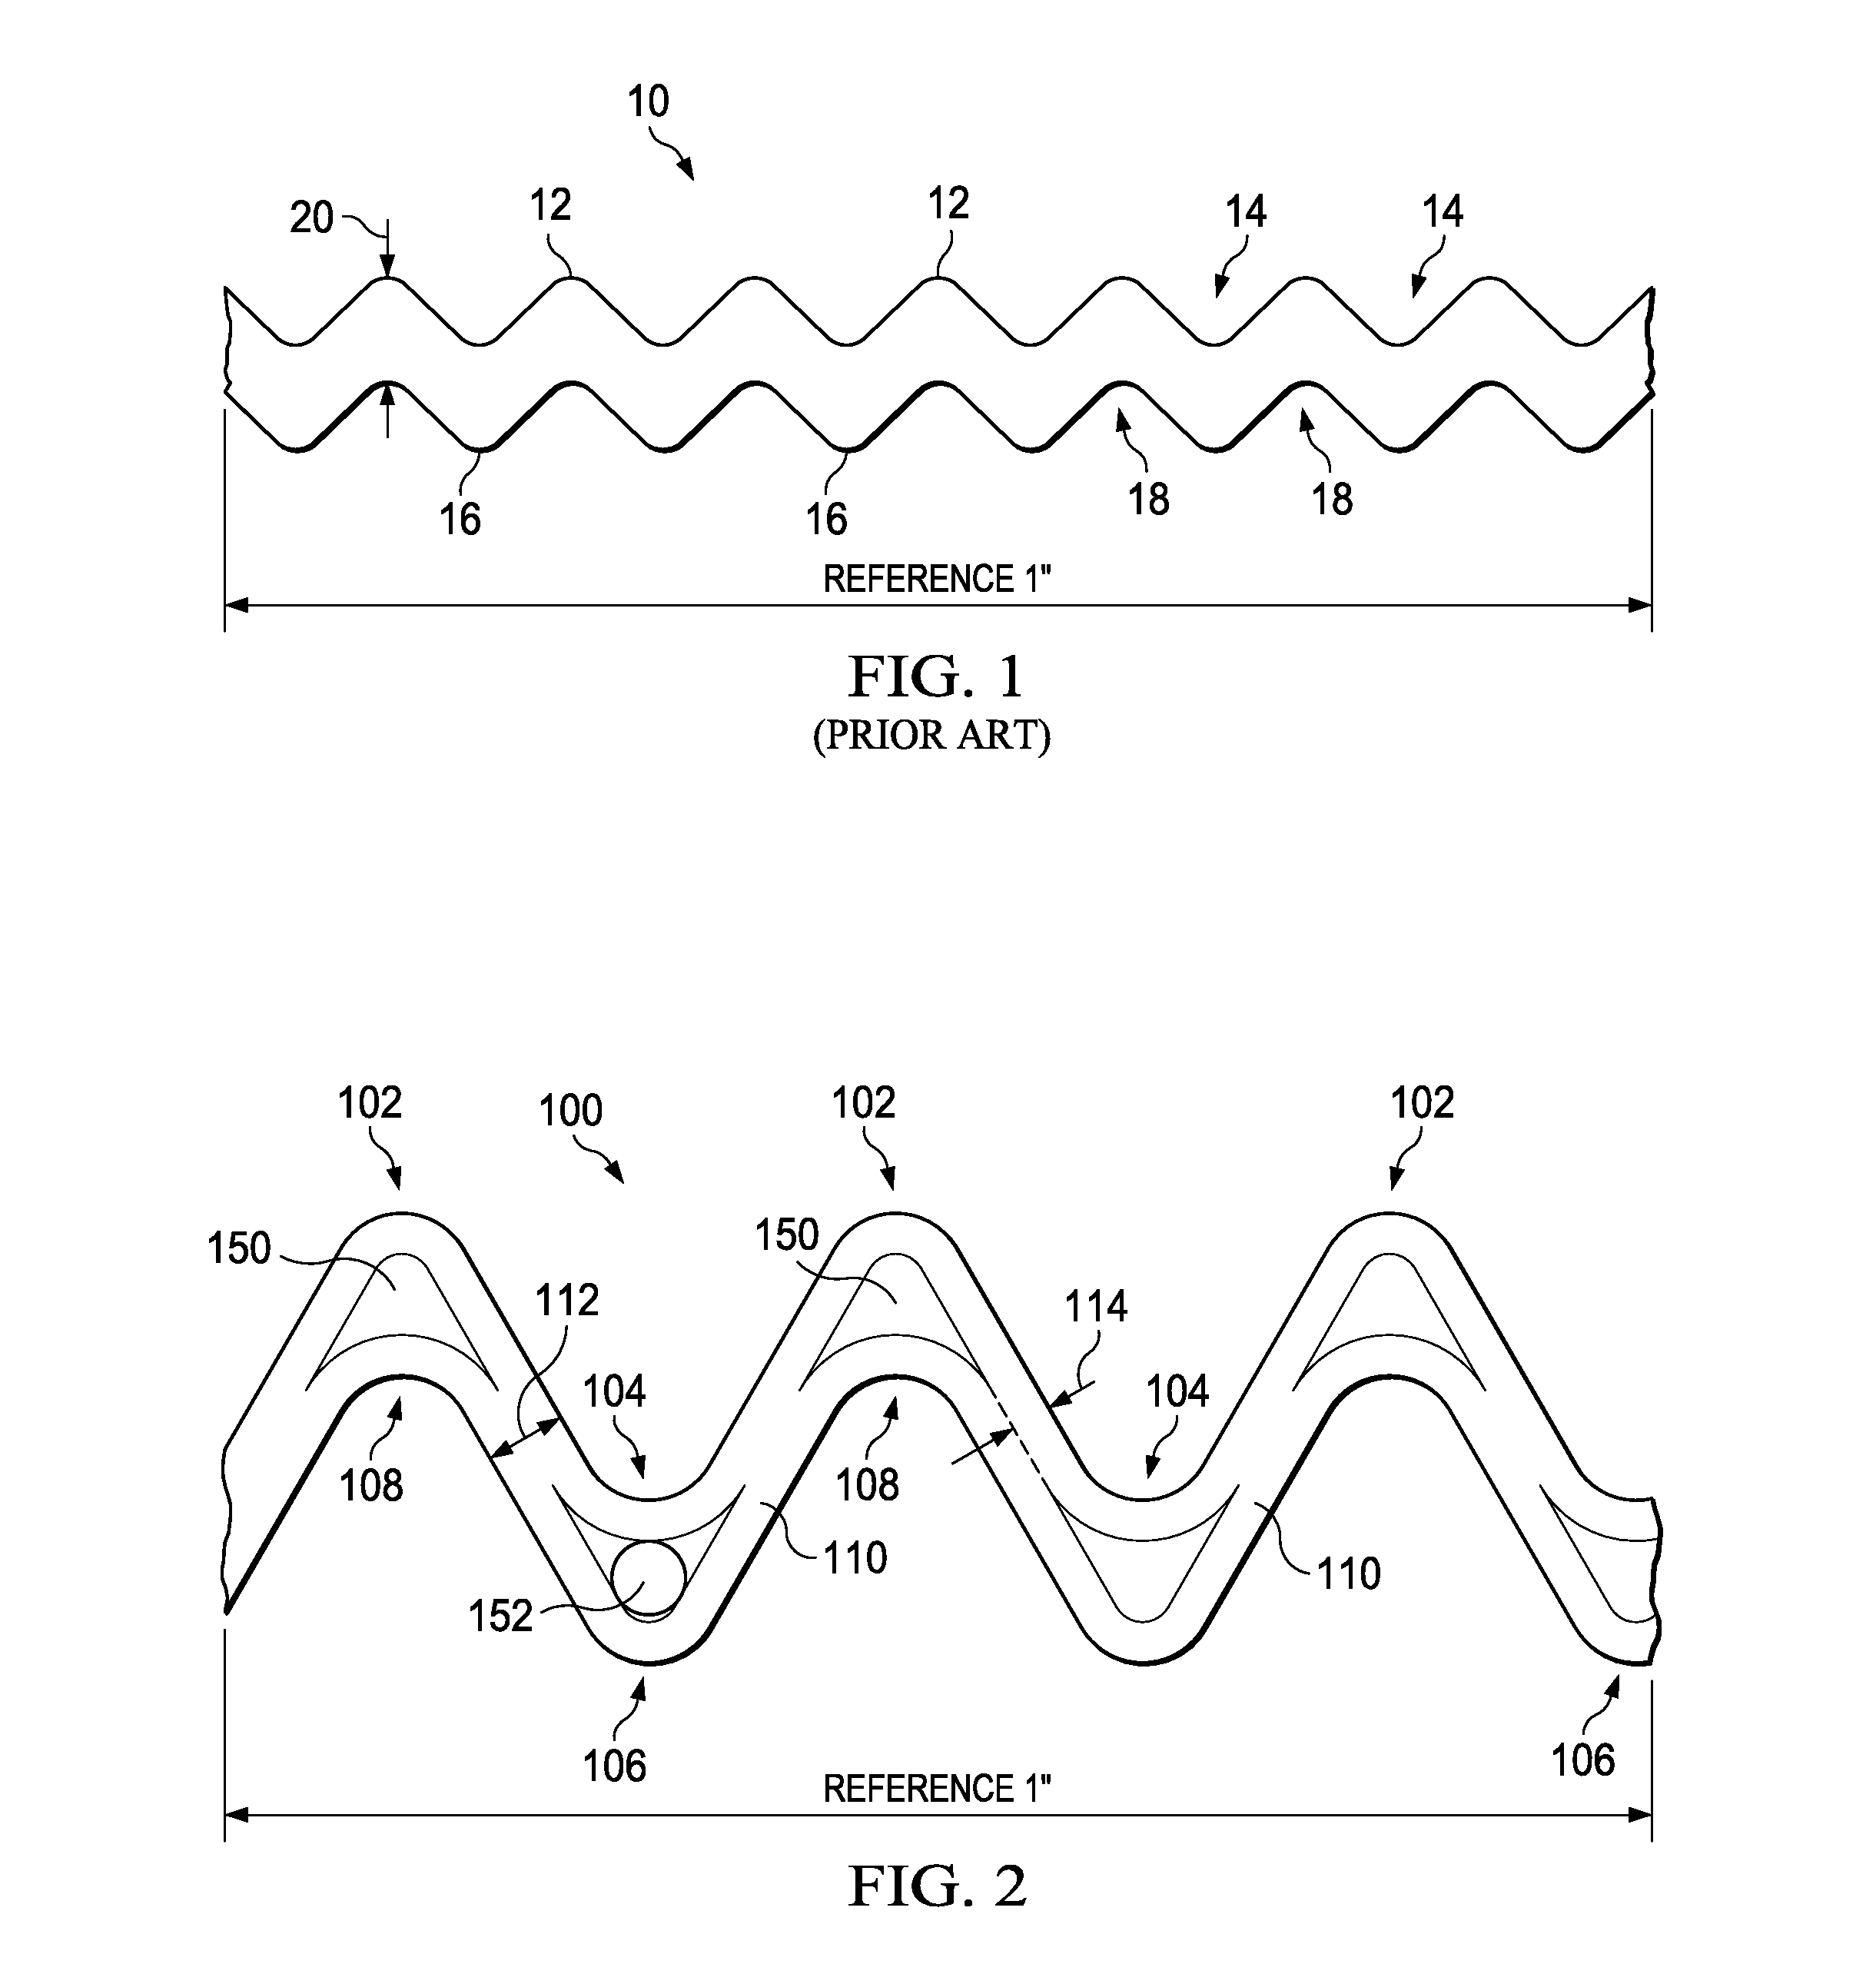 High Amplitude Corrugated Food Product and Method of Making Same